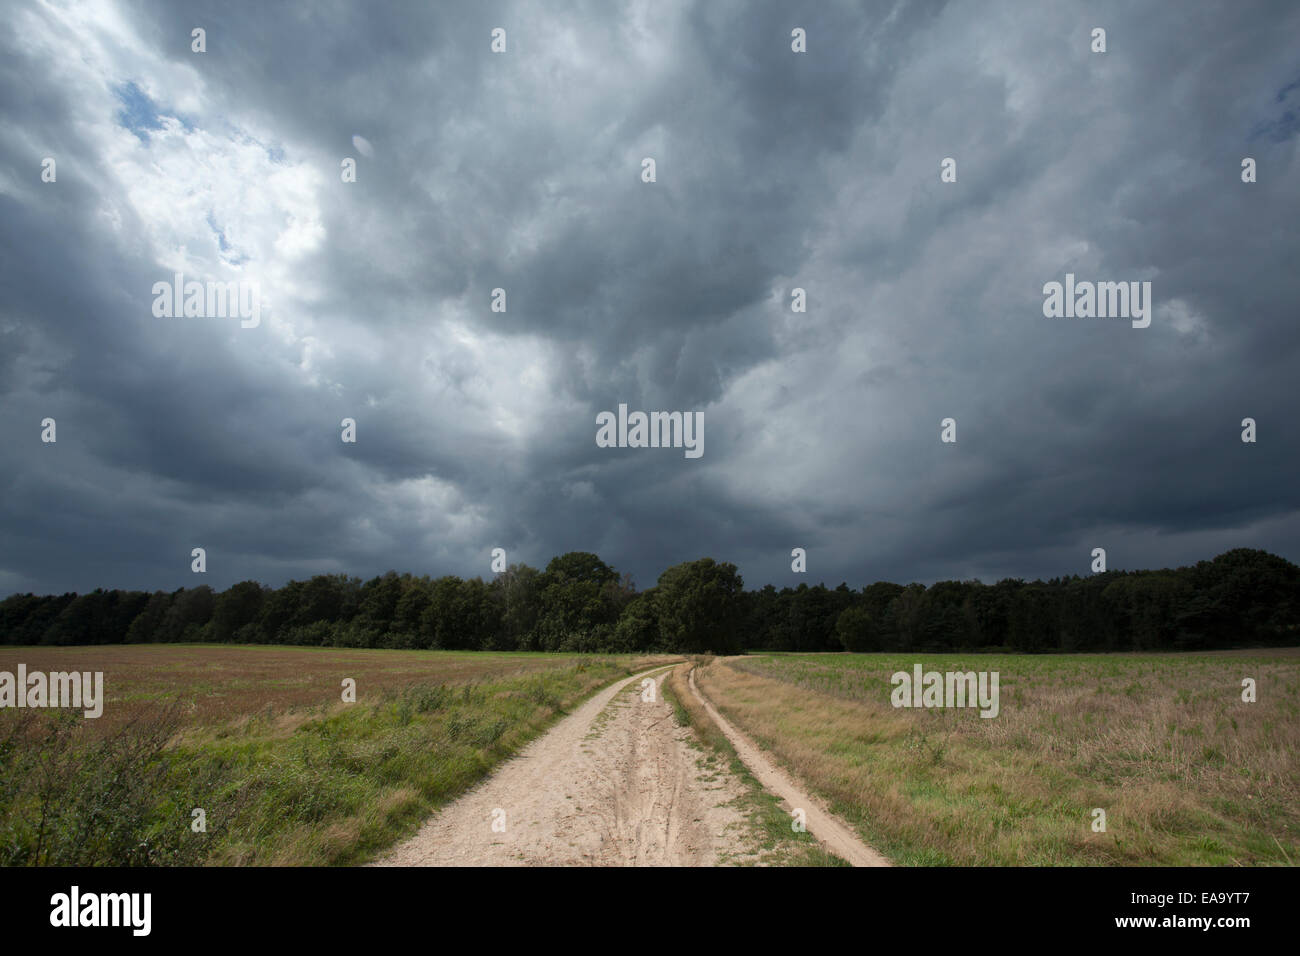 Landscape with an ominous sky and dark clouds Stock Photo